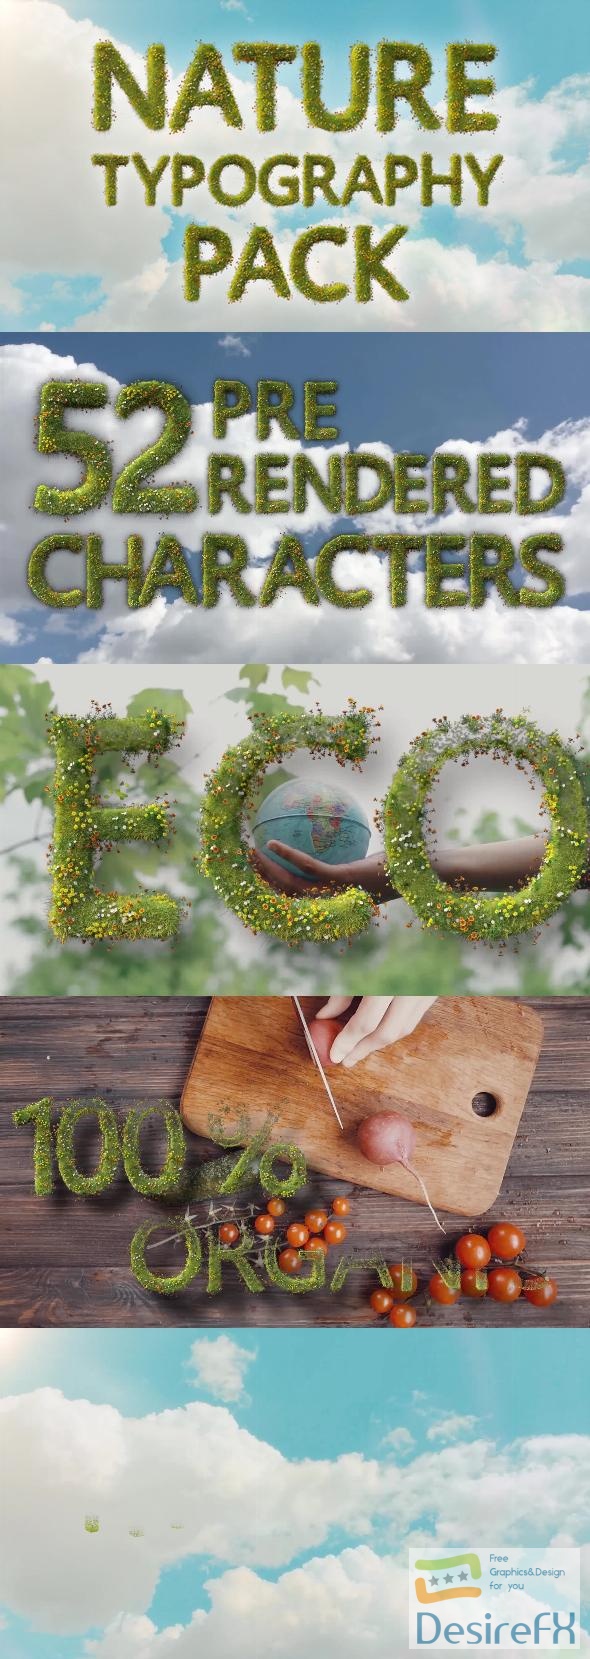 VideoHive Nature Typeface 46524814